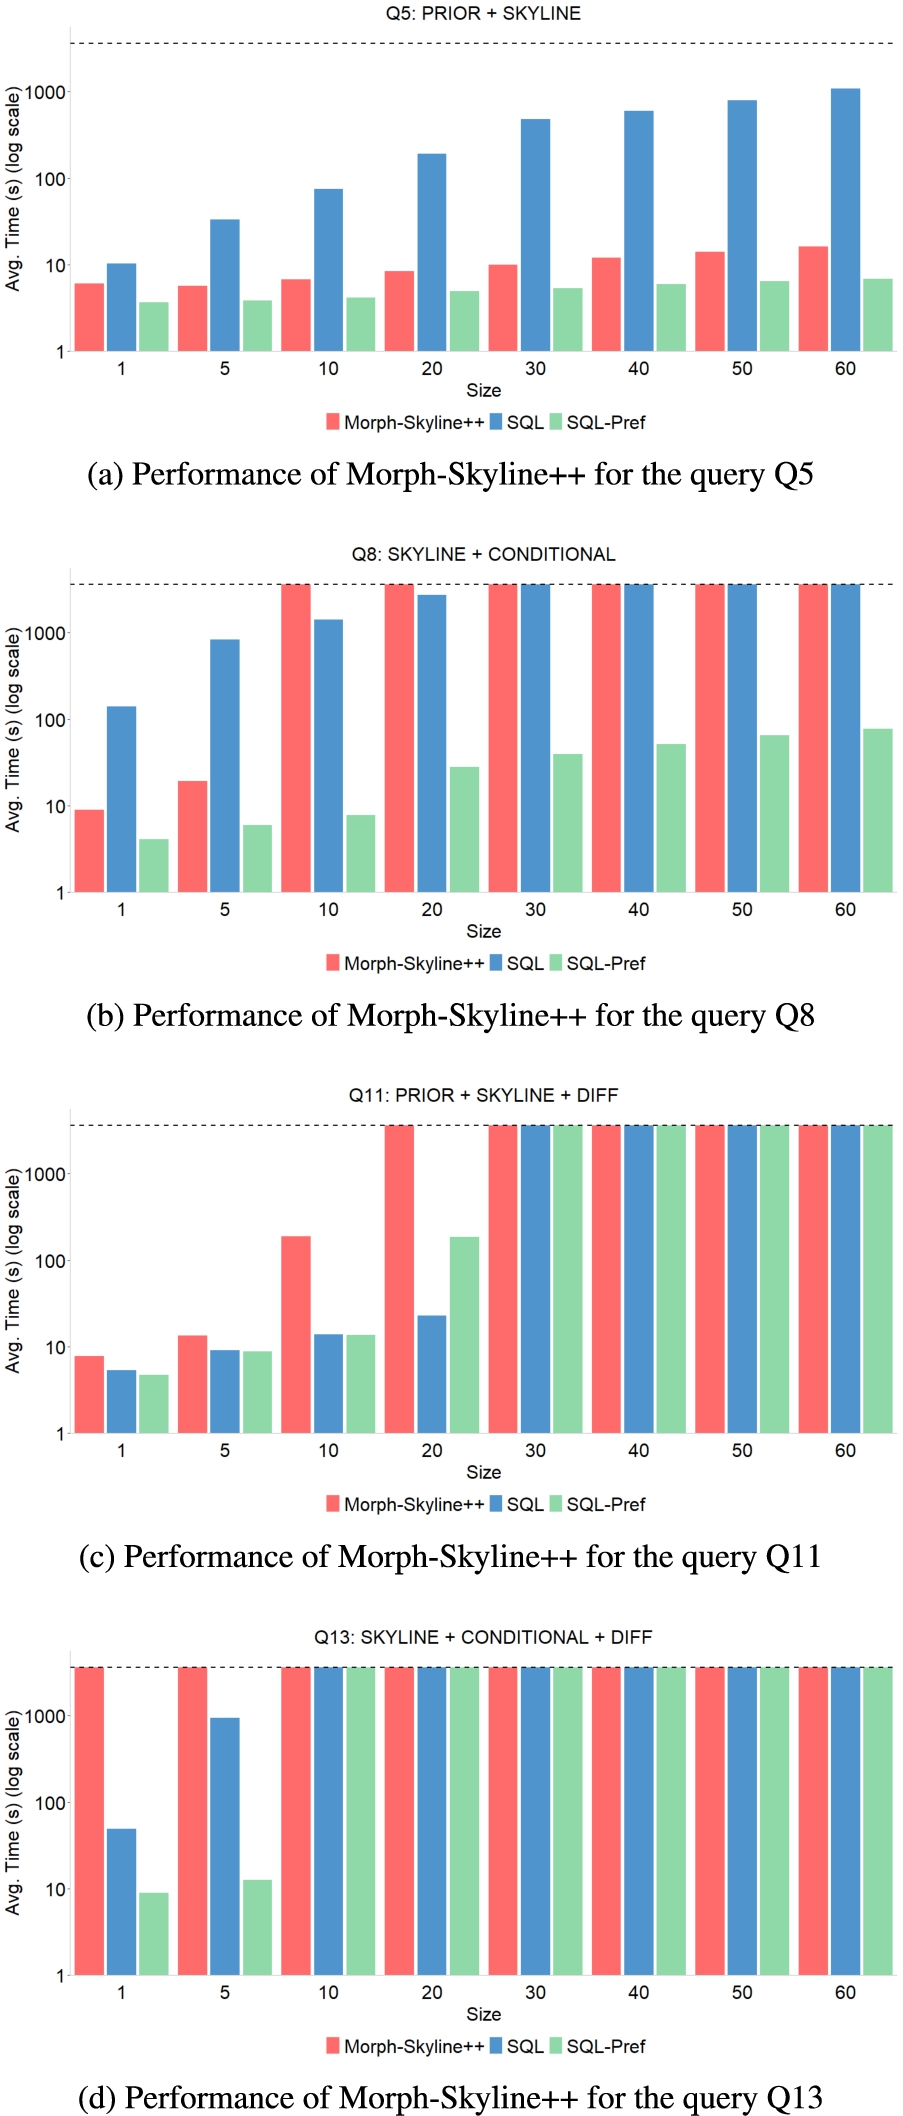 Performance of Morph-Skyline++. We compare QualQT implemented by Morph-Skyline++ against execution of skyline SQL queries and translated skyline SQL queries directly in the database engine for different queries.